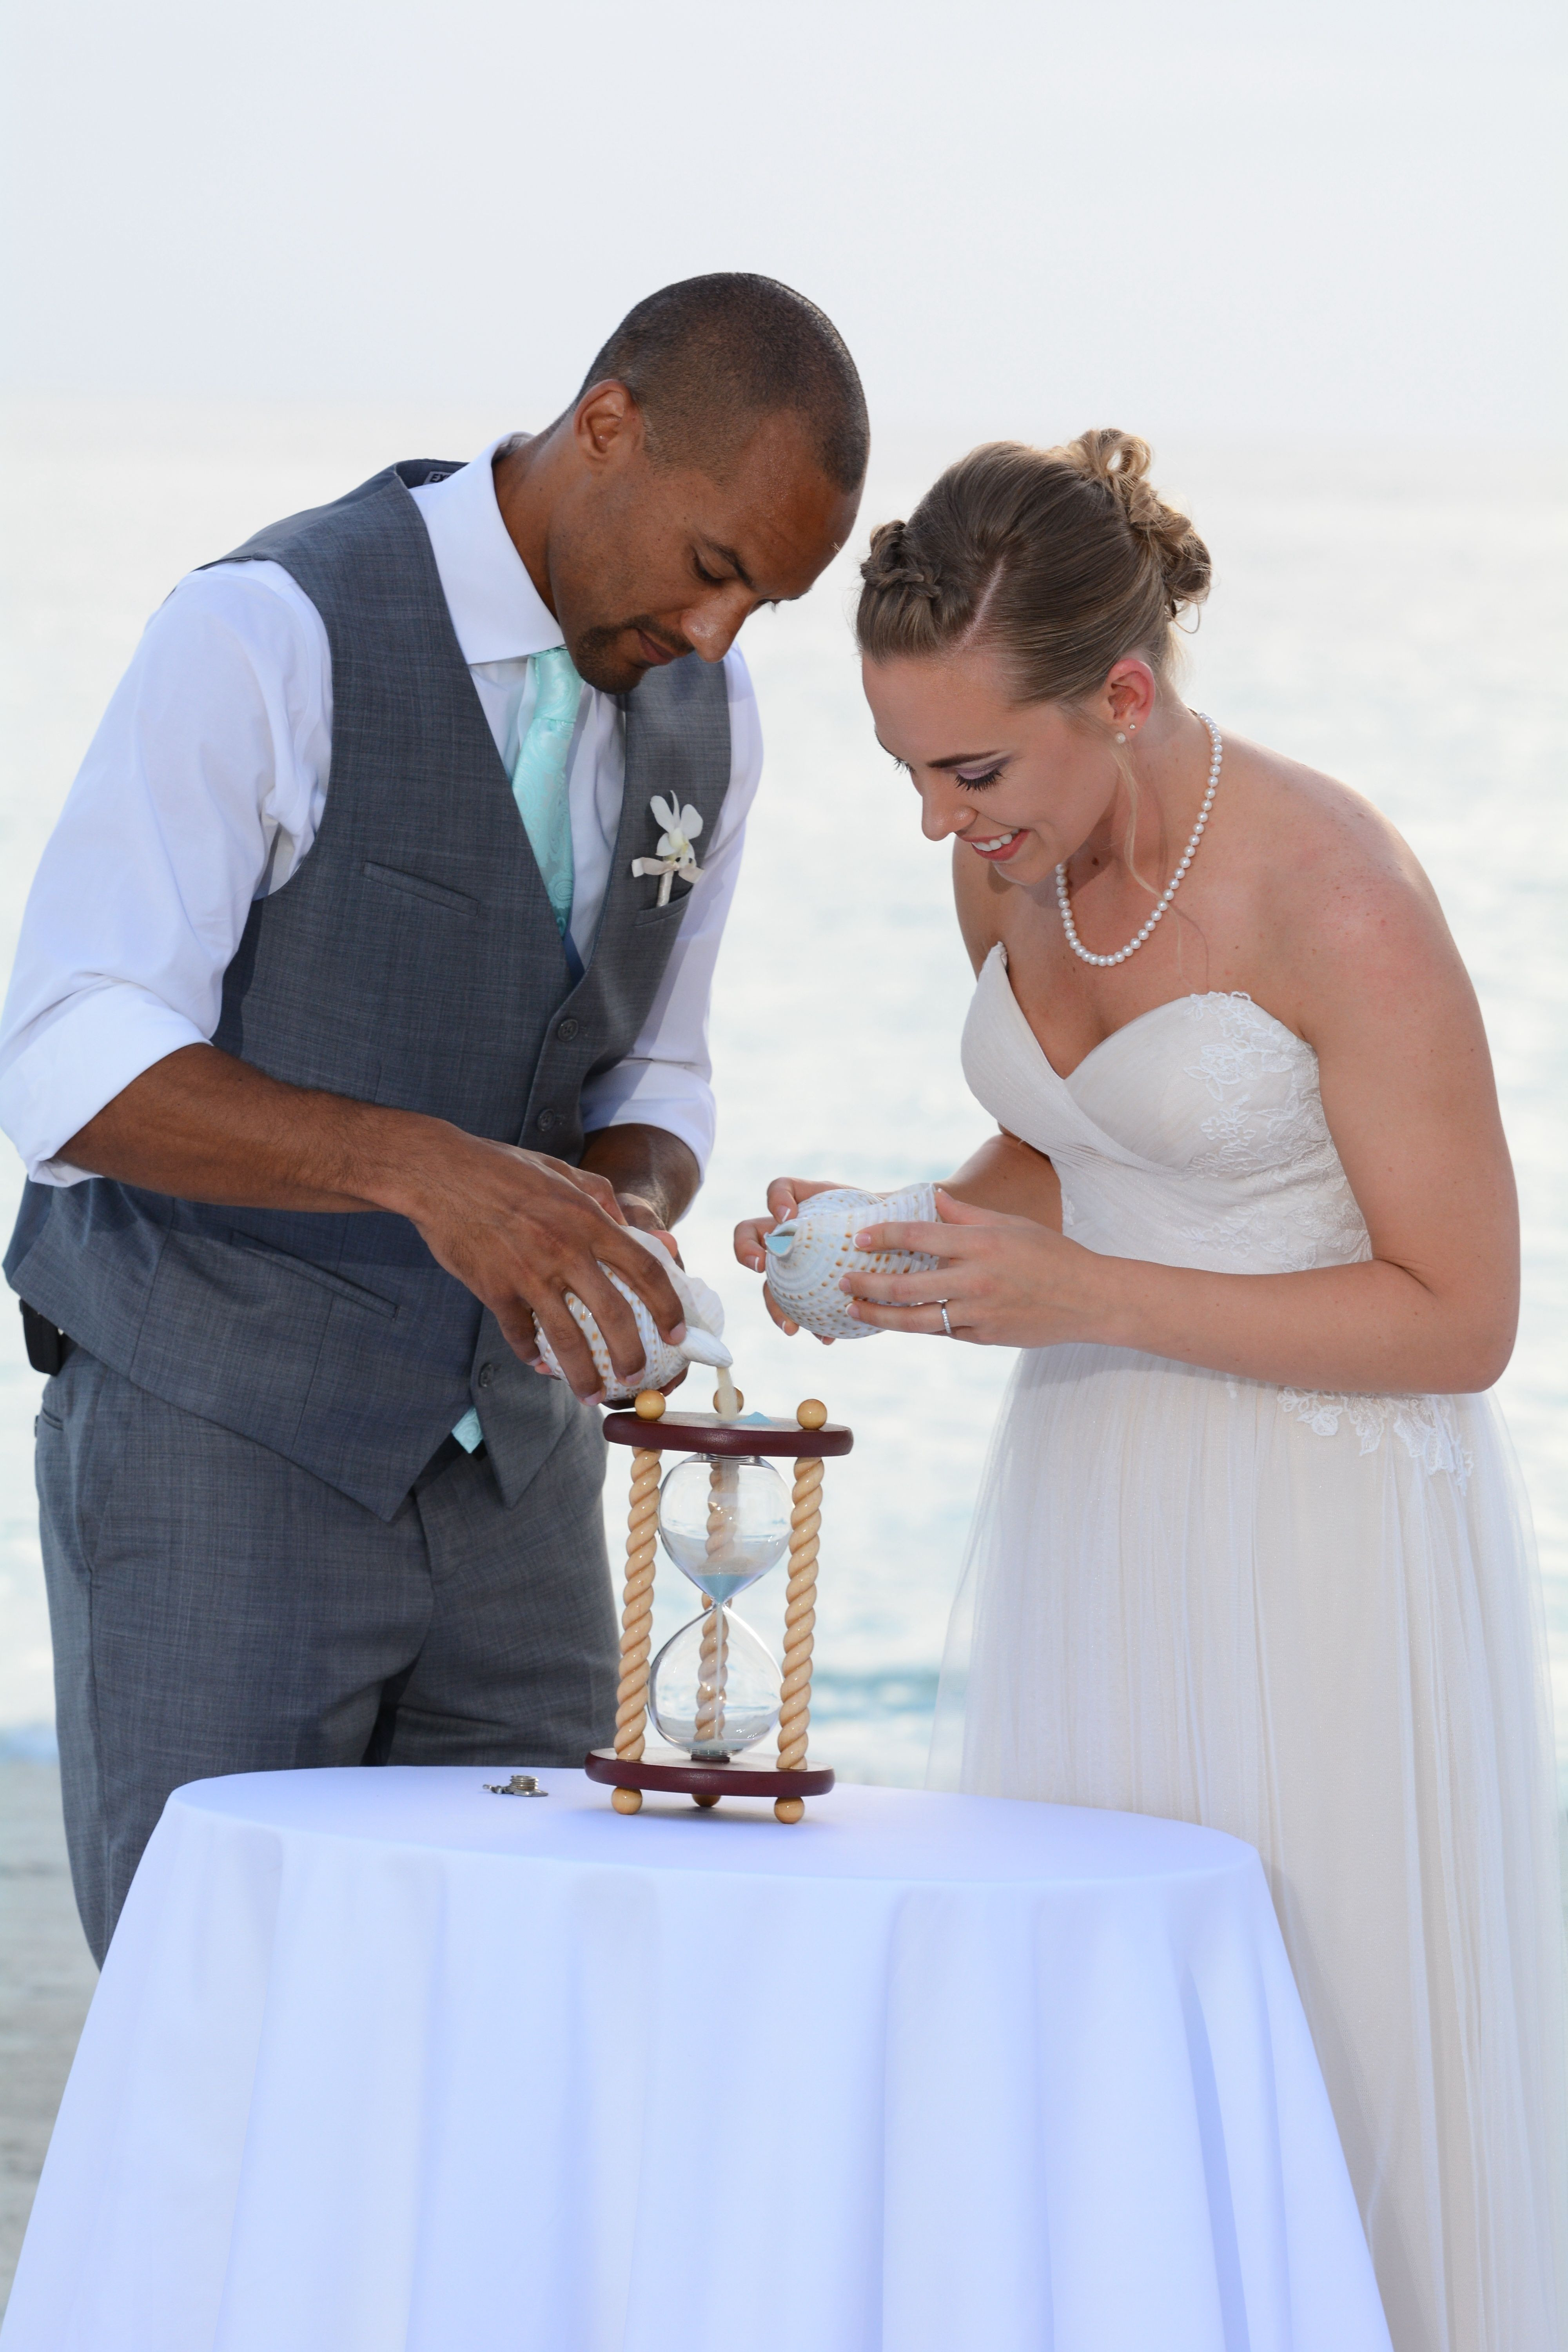 18 Perfect Unity Sand Ceremony Vase 2024 free download unity sand ceremony vase of love this picture of an hourglass sand ceremony wedding inside love this picture of an hourglass sand ceremony